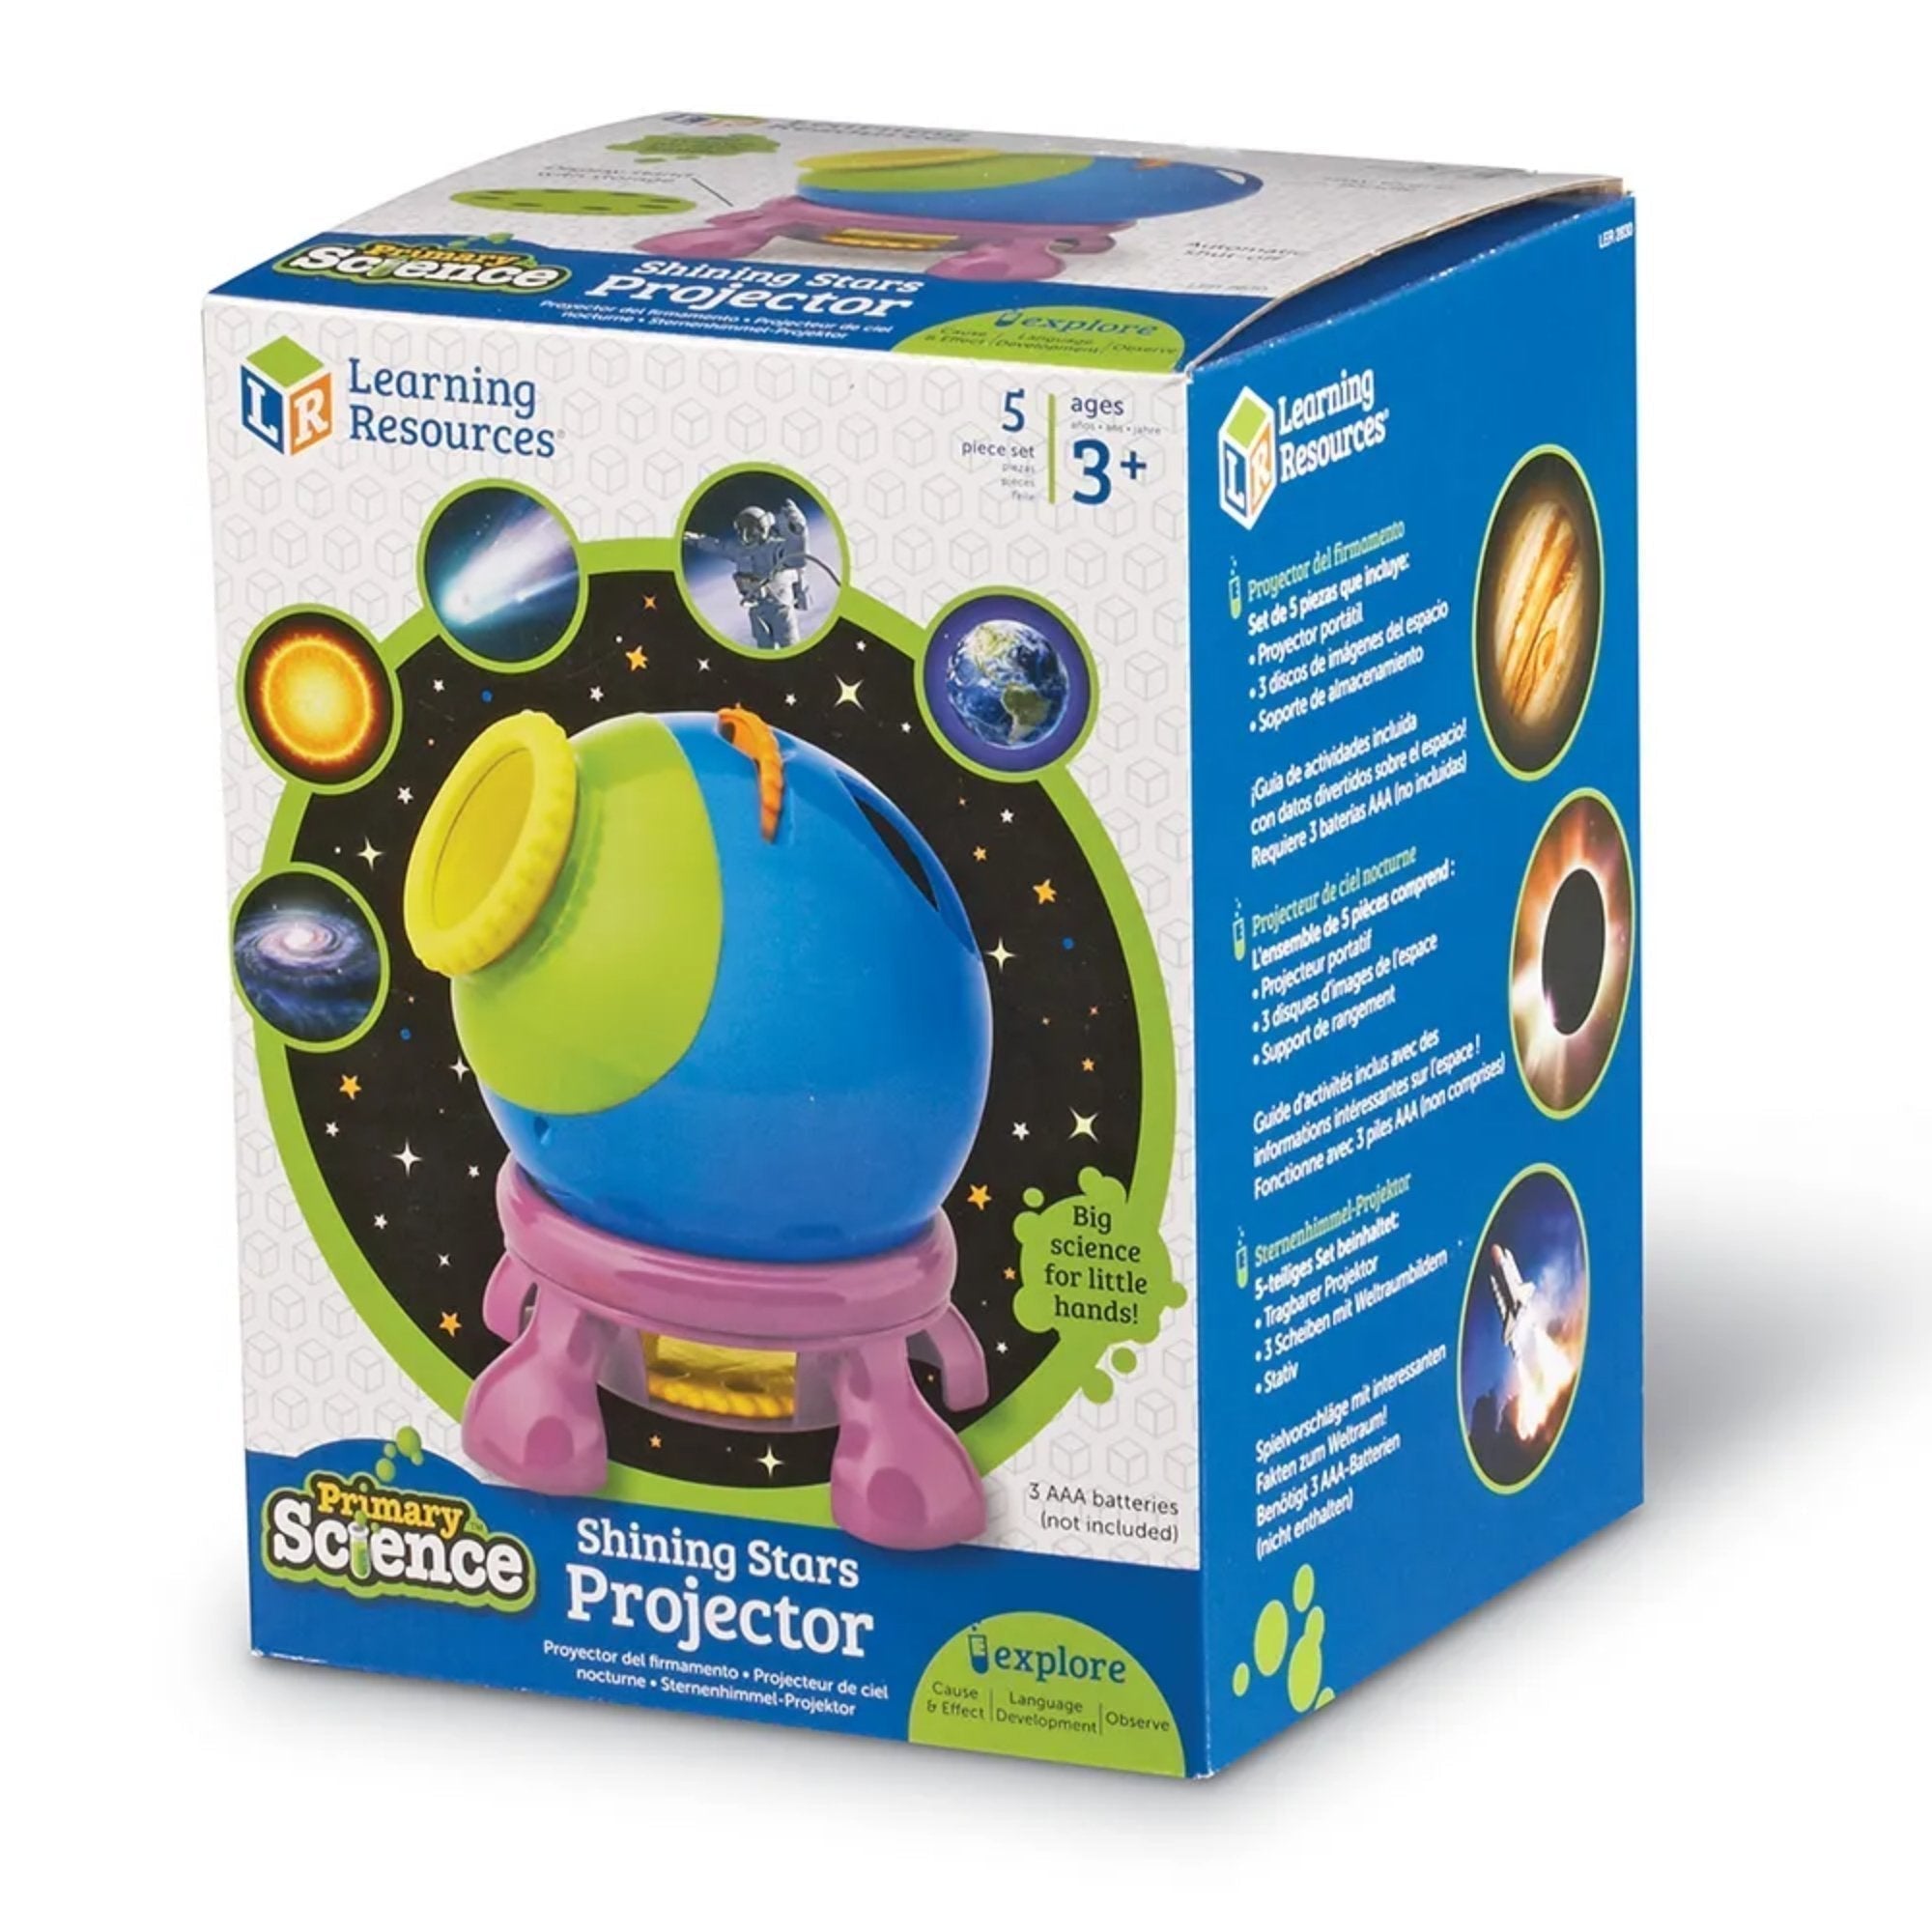 Primary Science Shining Stars Projector, The Primary Science Shining Stars Projector is a wonderful tool aimed at making science accessible and enjoyable for young learners. With its bright and vibrant colours, this projector is sure to captivate the attention of budding scientists, while its chunky design is perfectly tailored for little hands to easily operate. This easy-to-use Primary Science Shining Stars Projector fosters an early love for science, specifically in the realm of space and astronomy. Whet